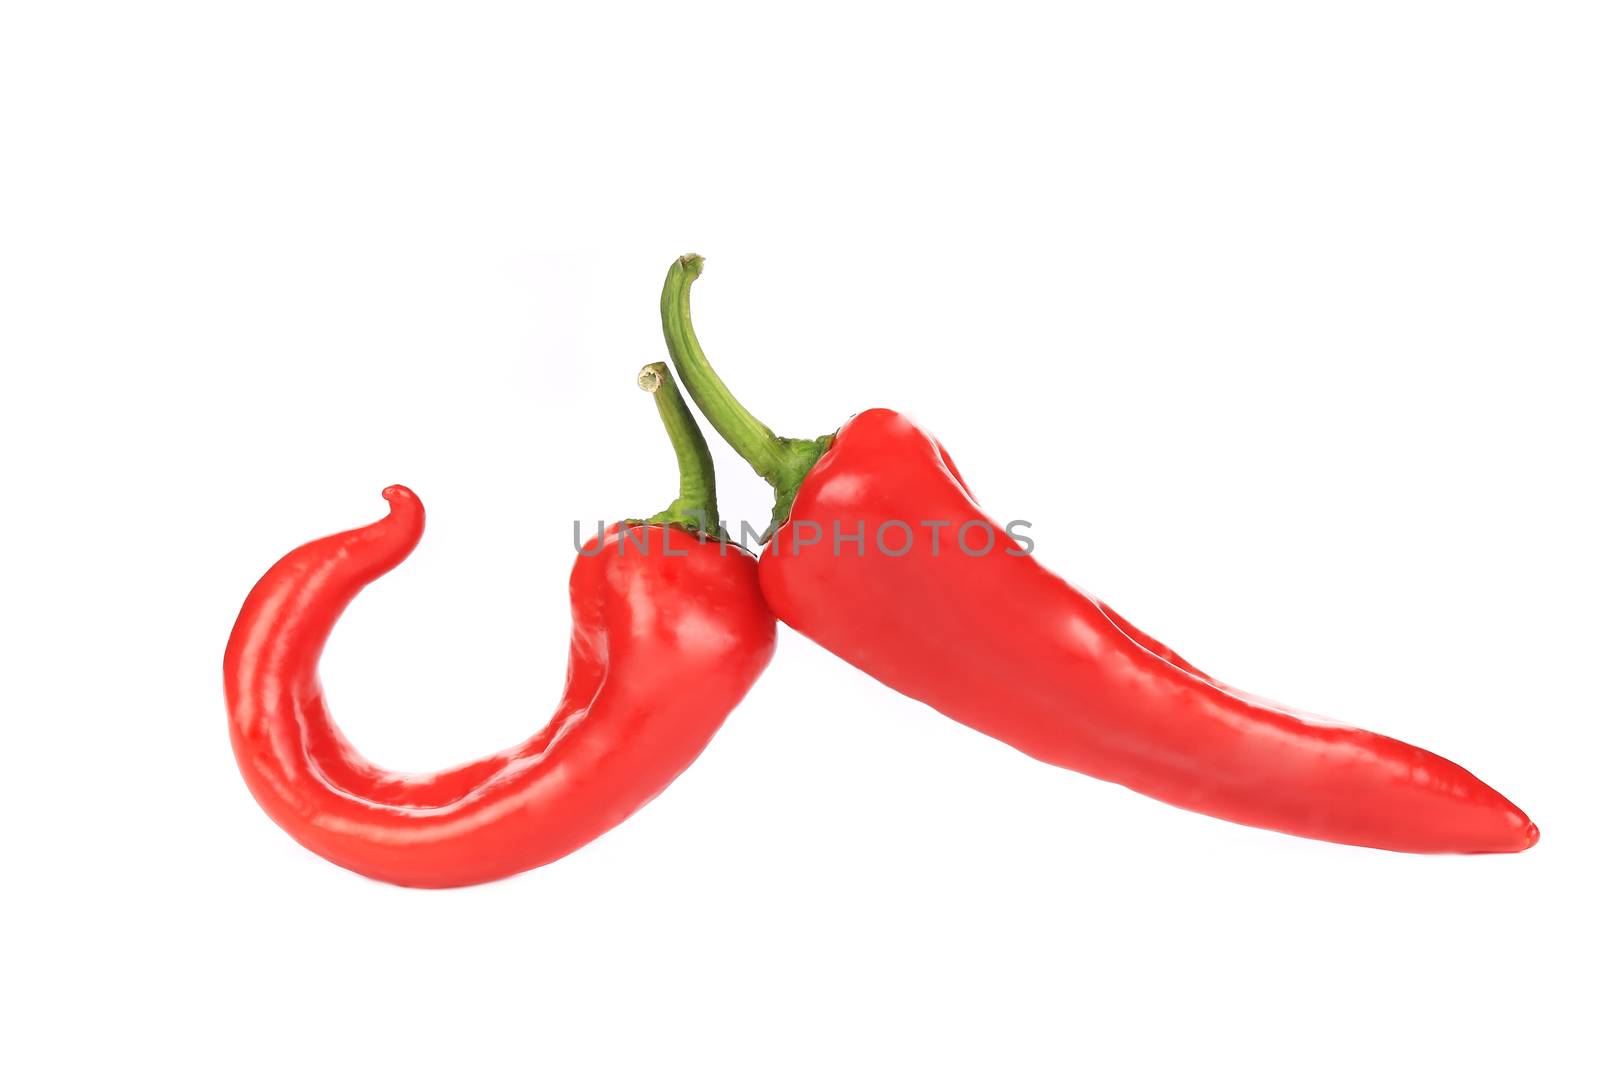 Two red chili peppers. by indigolotos